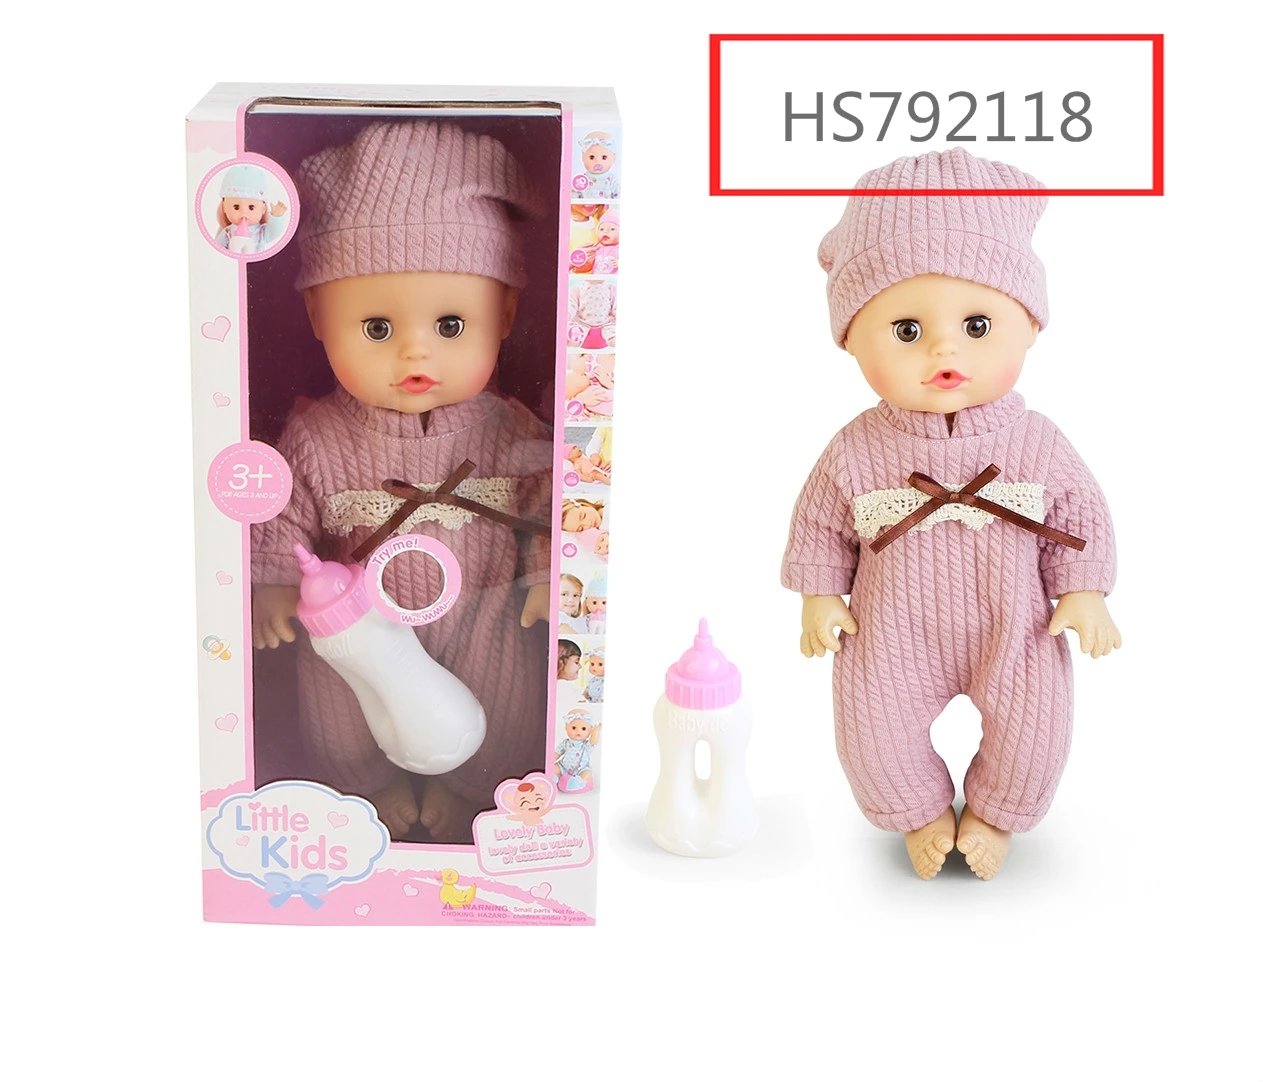 HS792118, Huwsin Toys, 13inch doll toy set fot kids